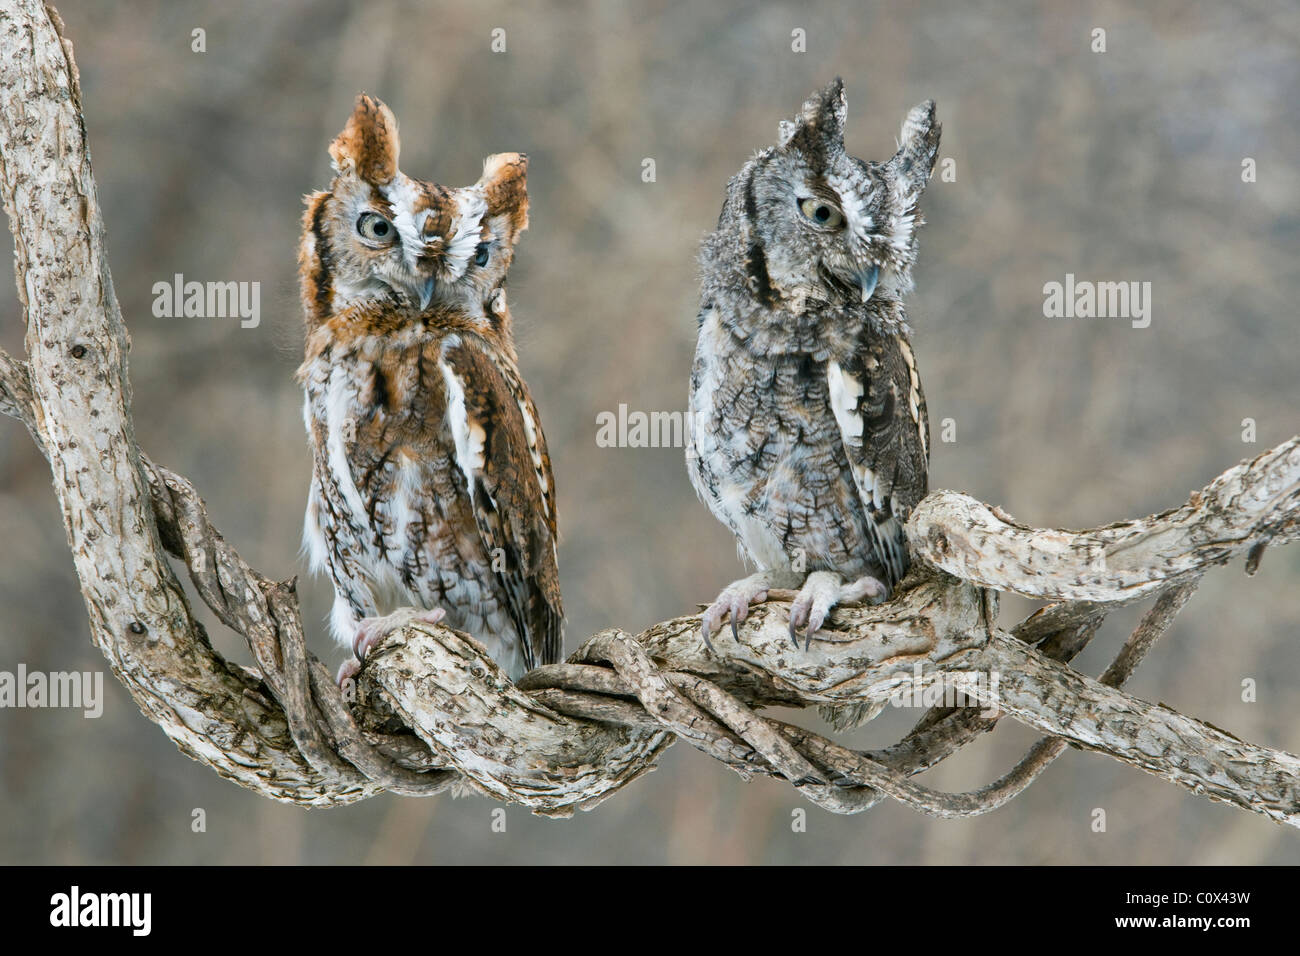 Common Screech Owls (Megascops asio), Rufous and Gray phases Eastern North America, by Skip Moody/Dembinsky Photo Assoc Stock Photo